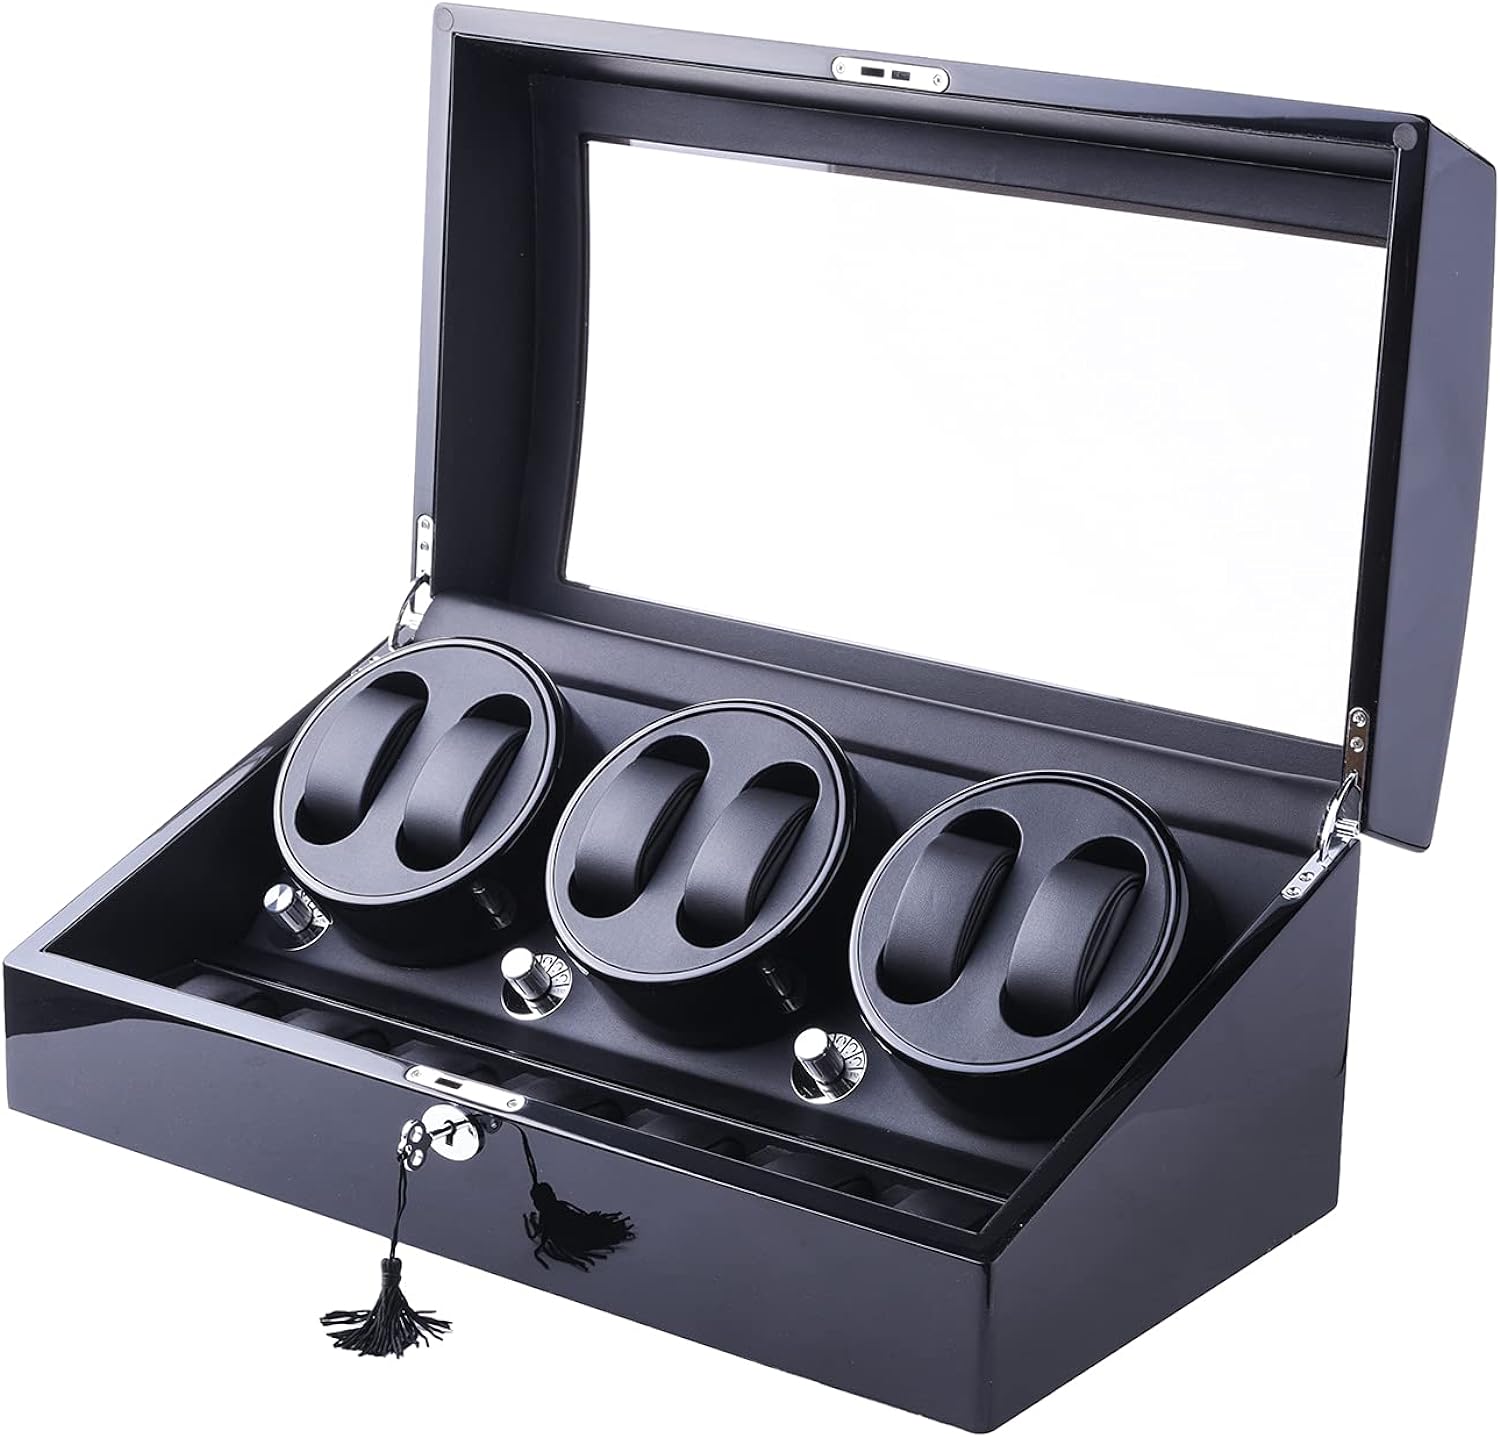 Watch Winder, XTELARY Automatic Watch Winder Box with 6 Watch Winder Positions and 7 Display Storage Spaces